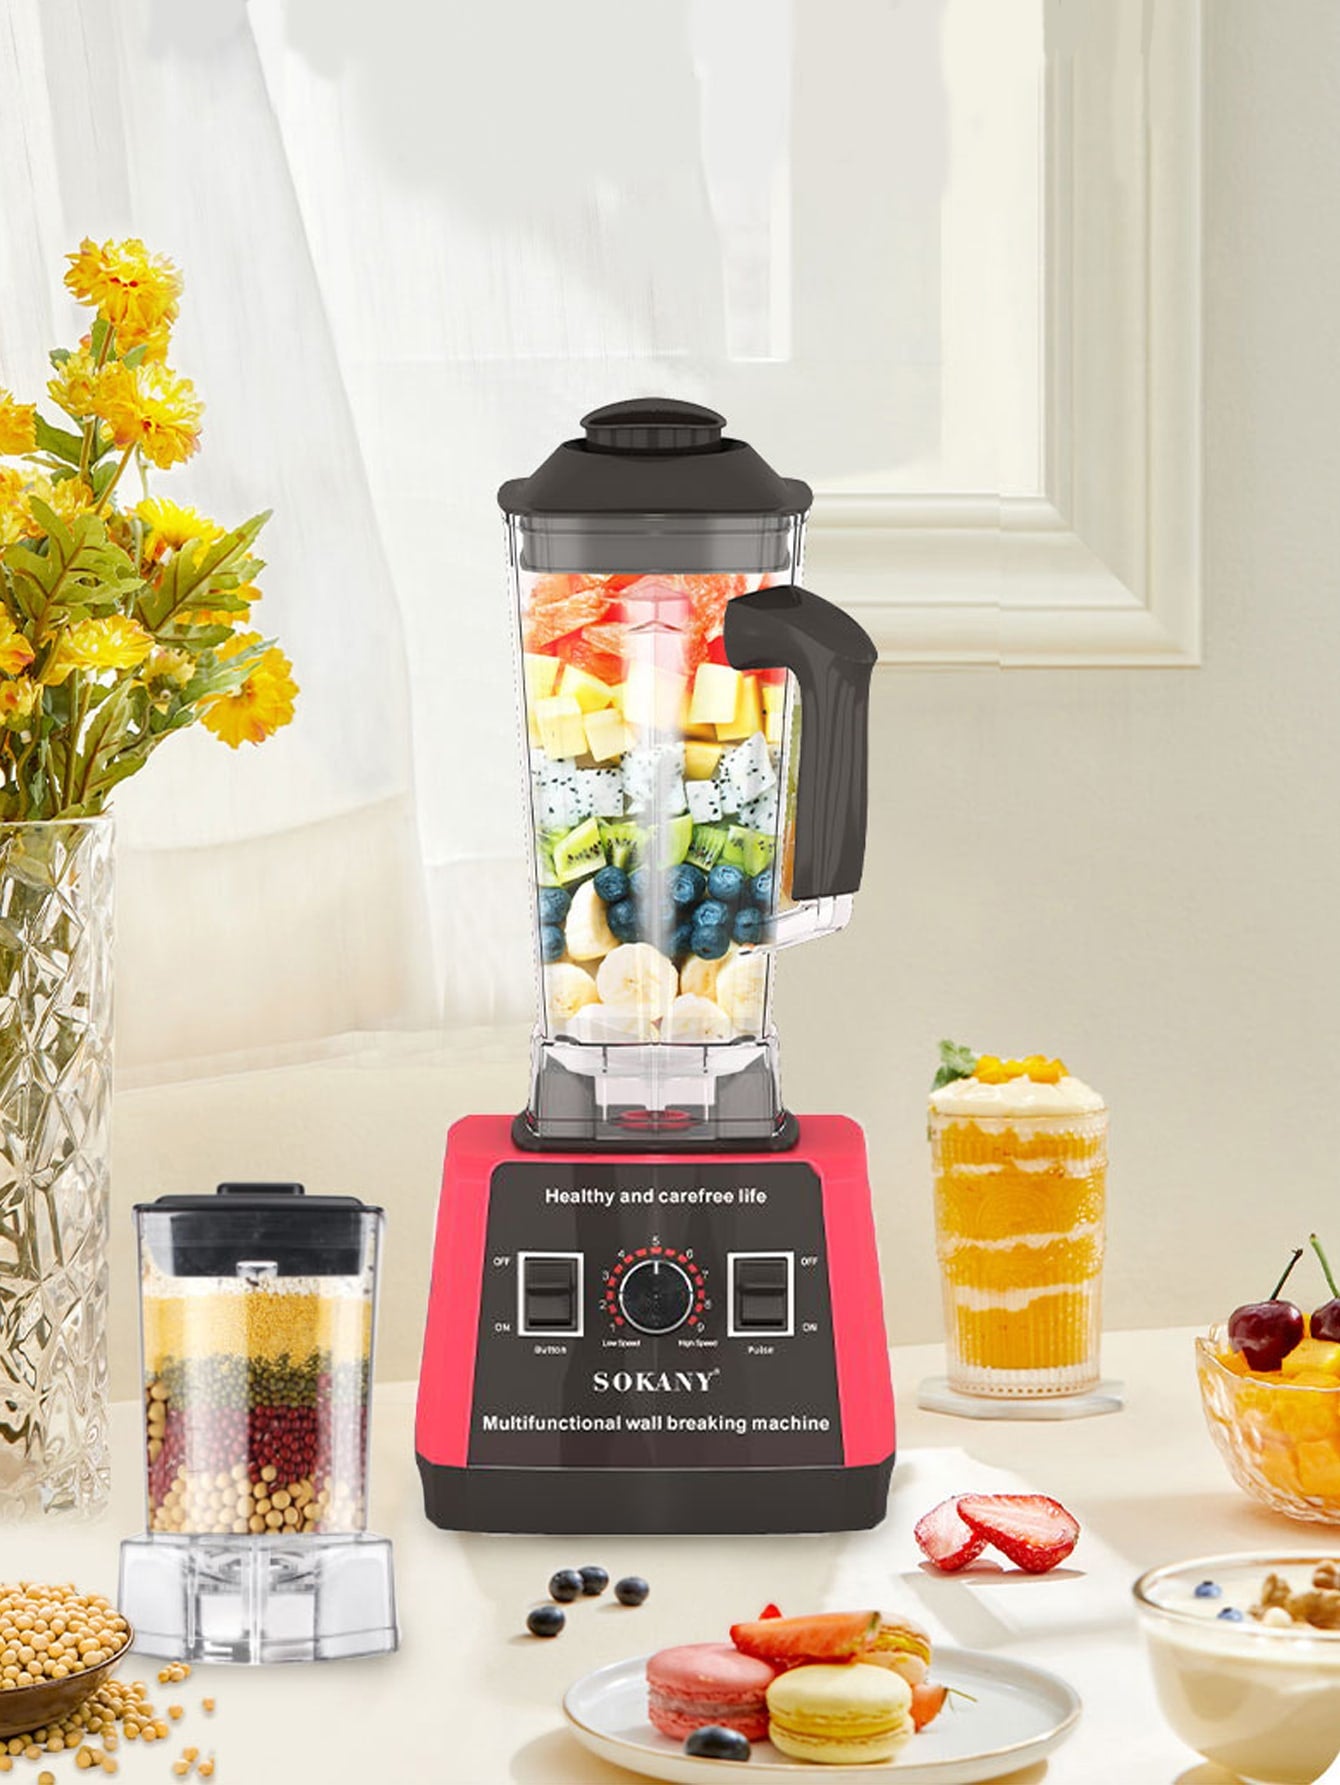 1pc Plug-in 2.5l Multifunctional Blender(sk-666) 5000w Ultra-large Power, Copper Motor, 9 Adjustable Speed Levels, Sharp Blades, Fine Grinding, Sealed Rubber Cover, Easy Switch, Convenient Handle, Measuring Cup Scale Design-Red-1